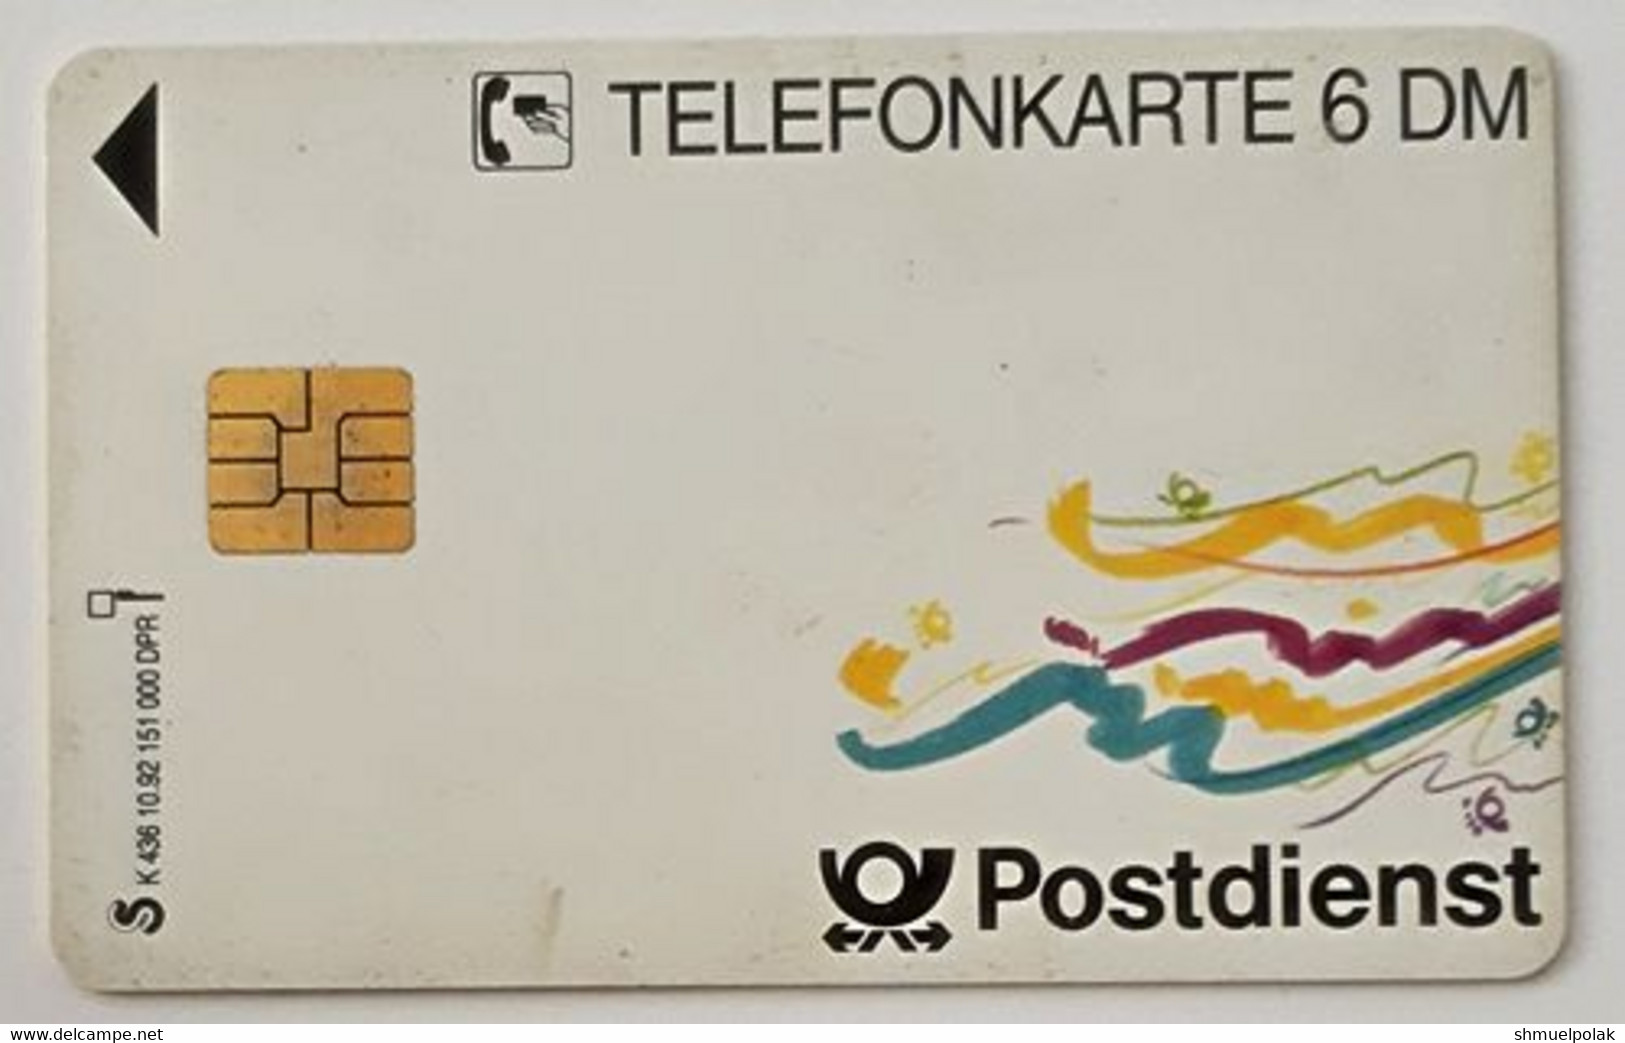 GERMANY Phone Card Telefonkarte Deutsche Telkom 1992 6DM 151000 Units Have Been Issued - Other & Unclassified